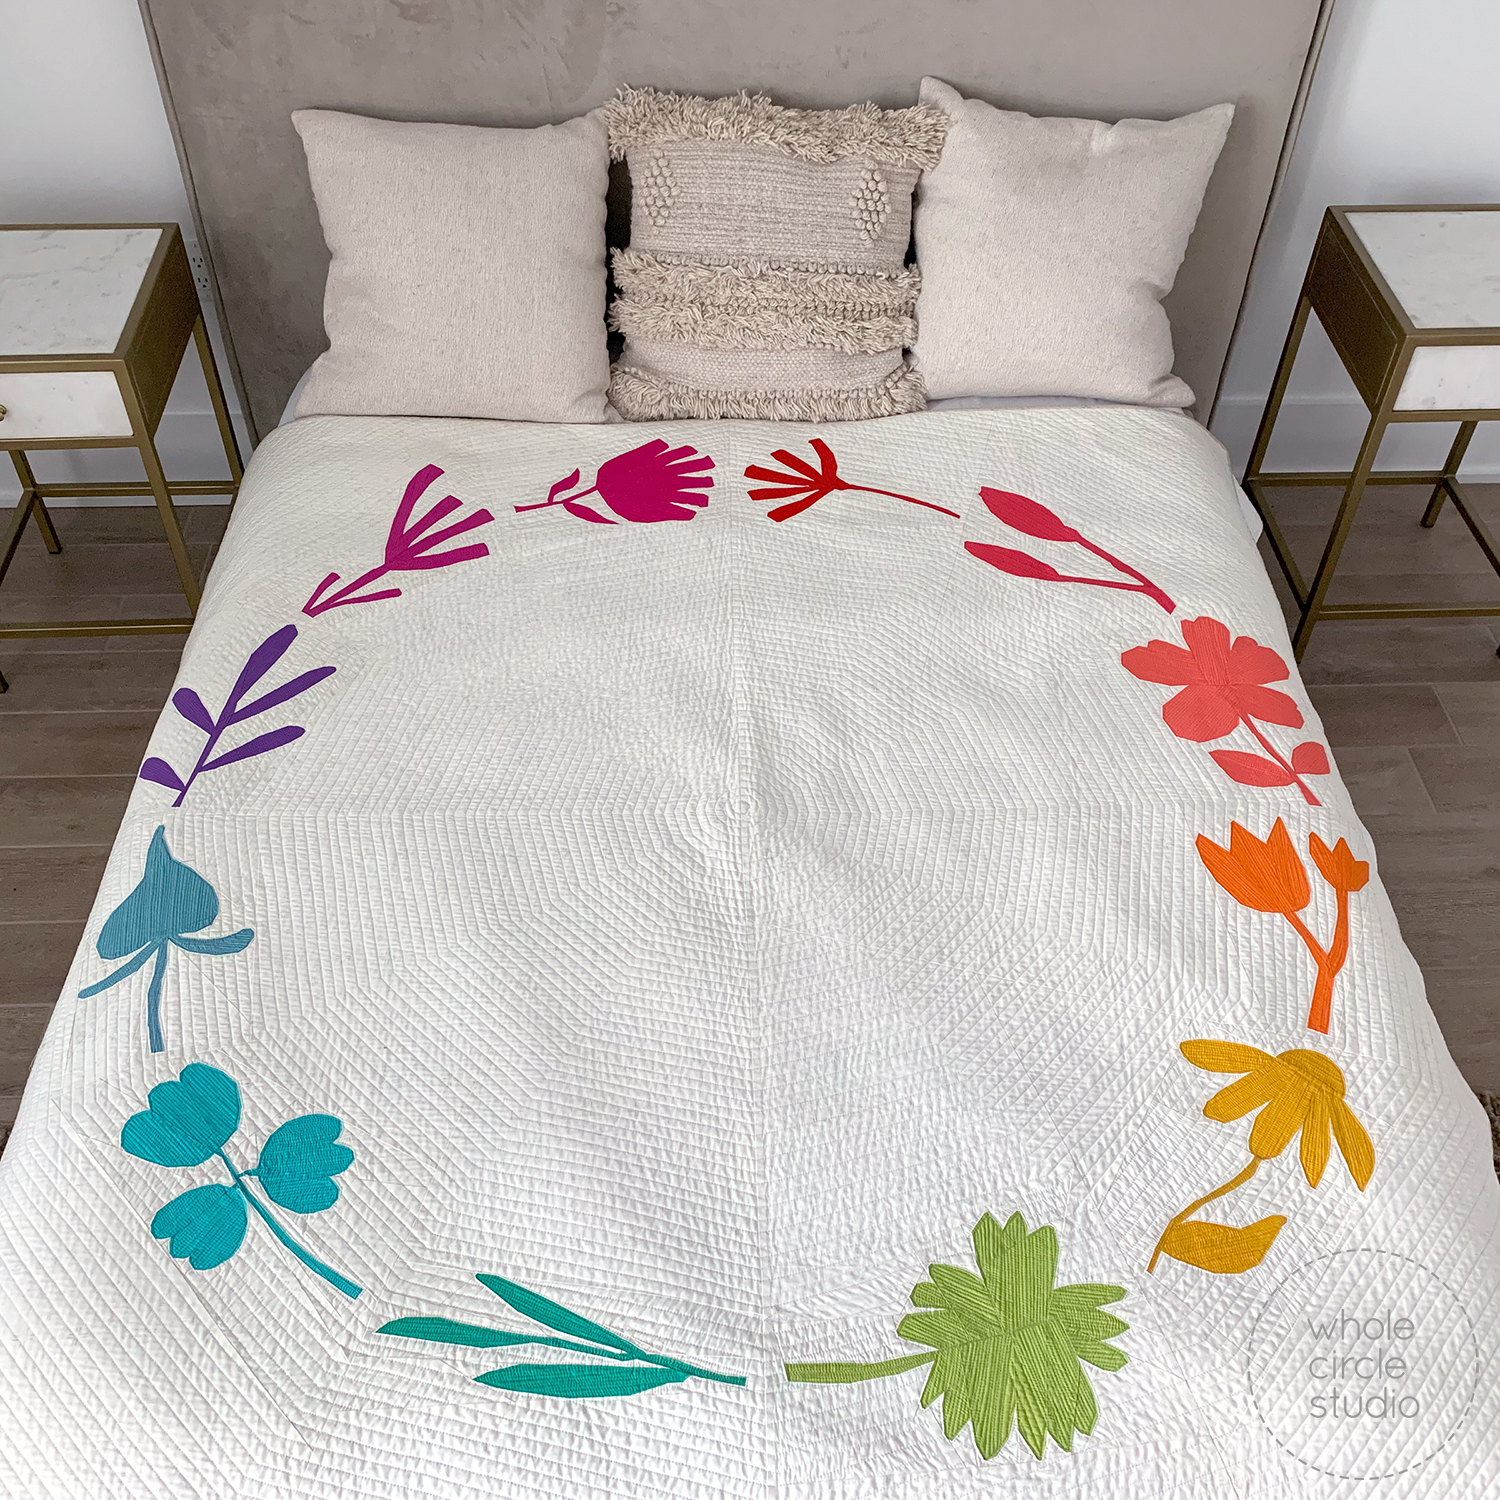 bed with colorful Botanical themed quilt